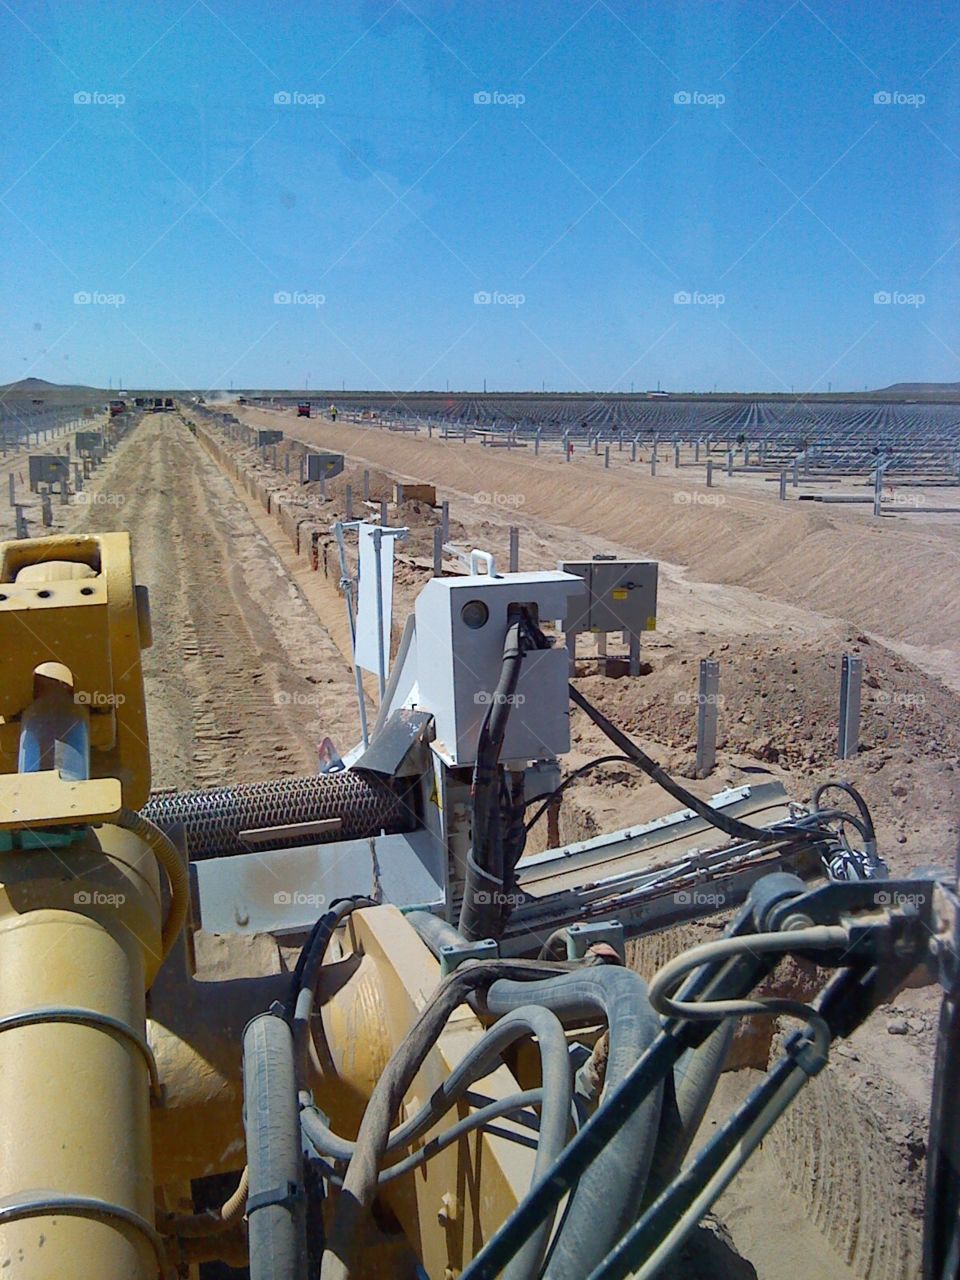 Working the padder on a solar farm install 